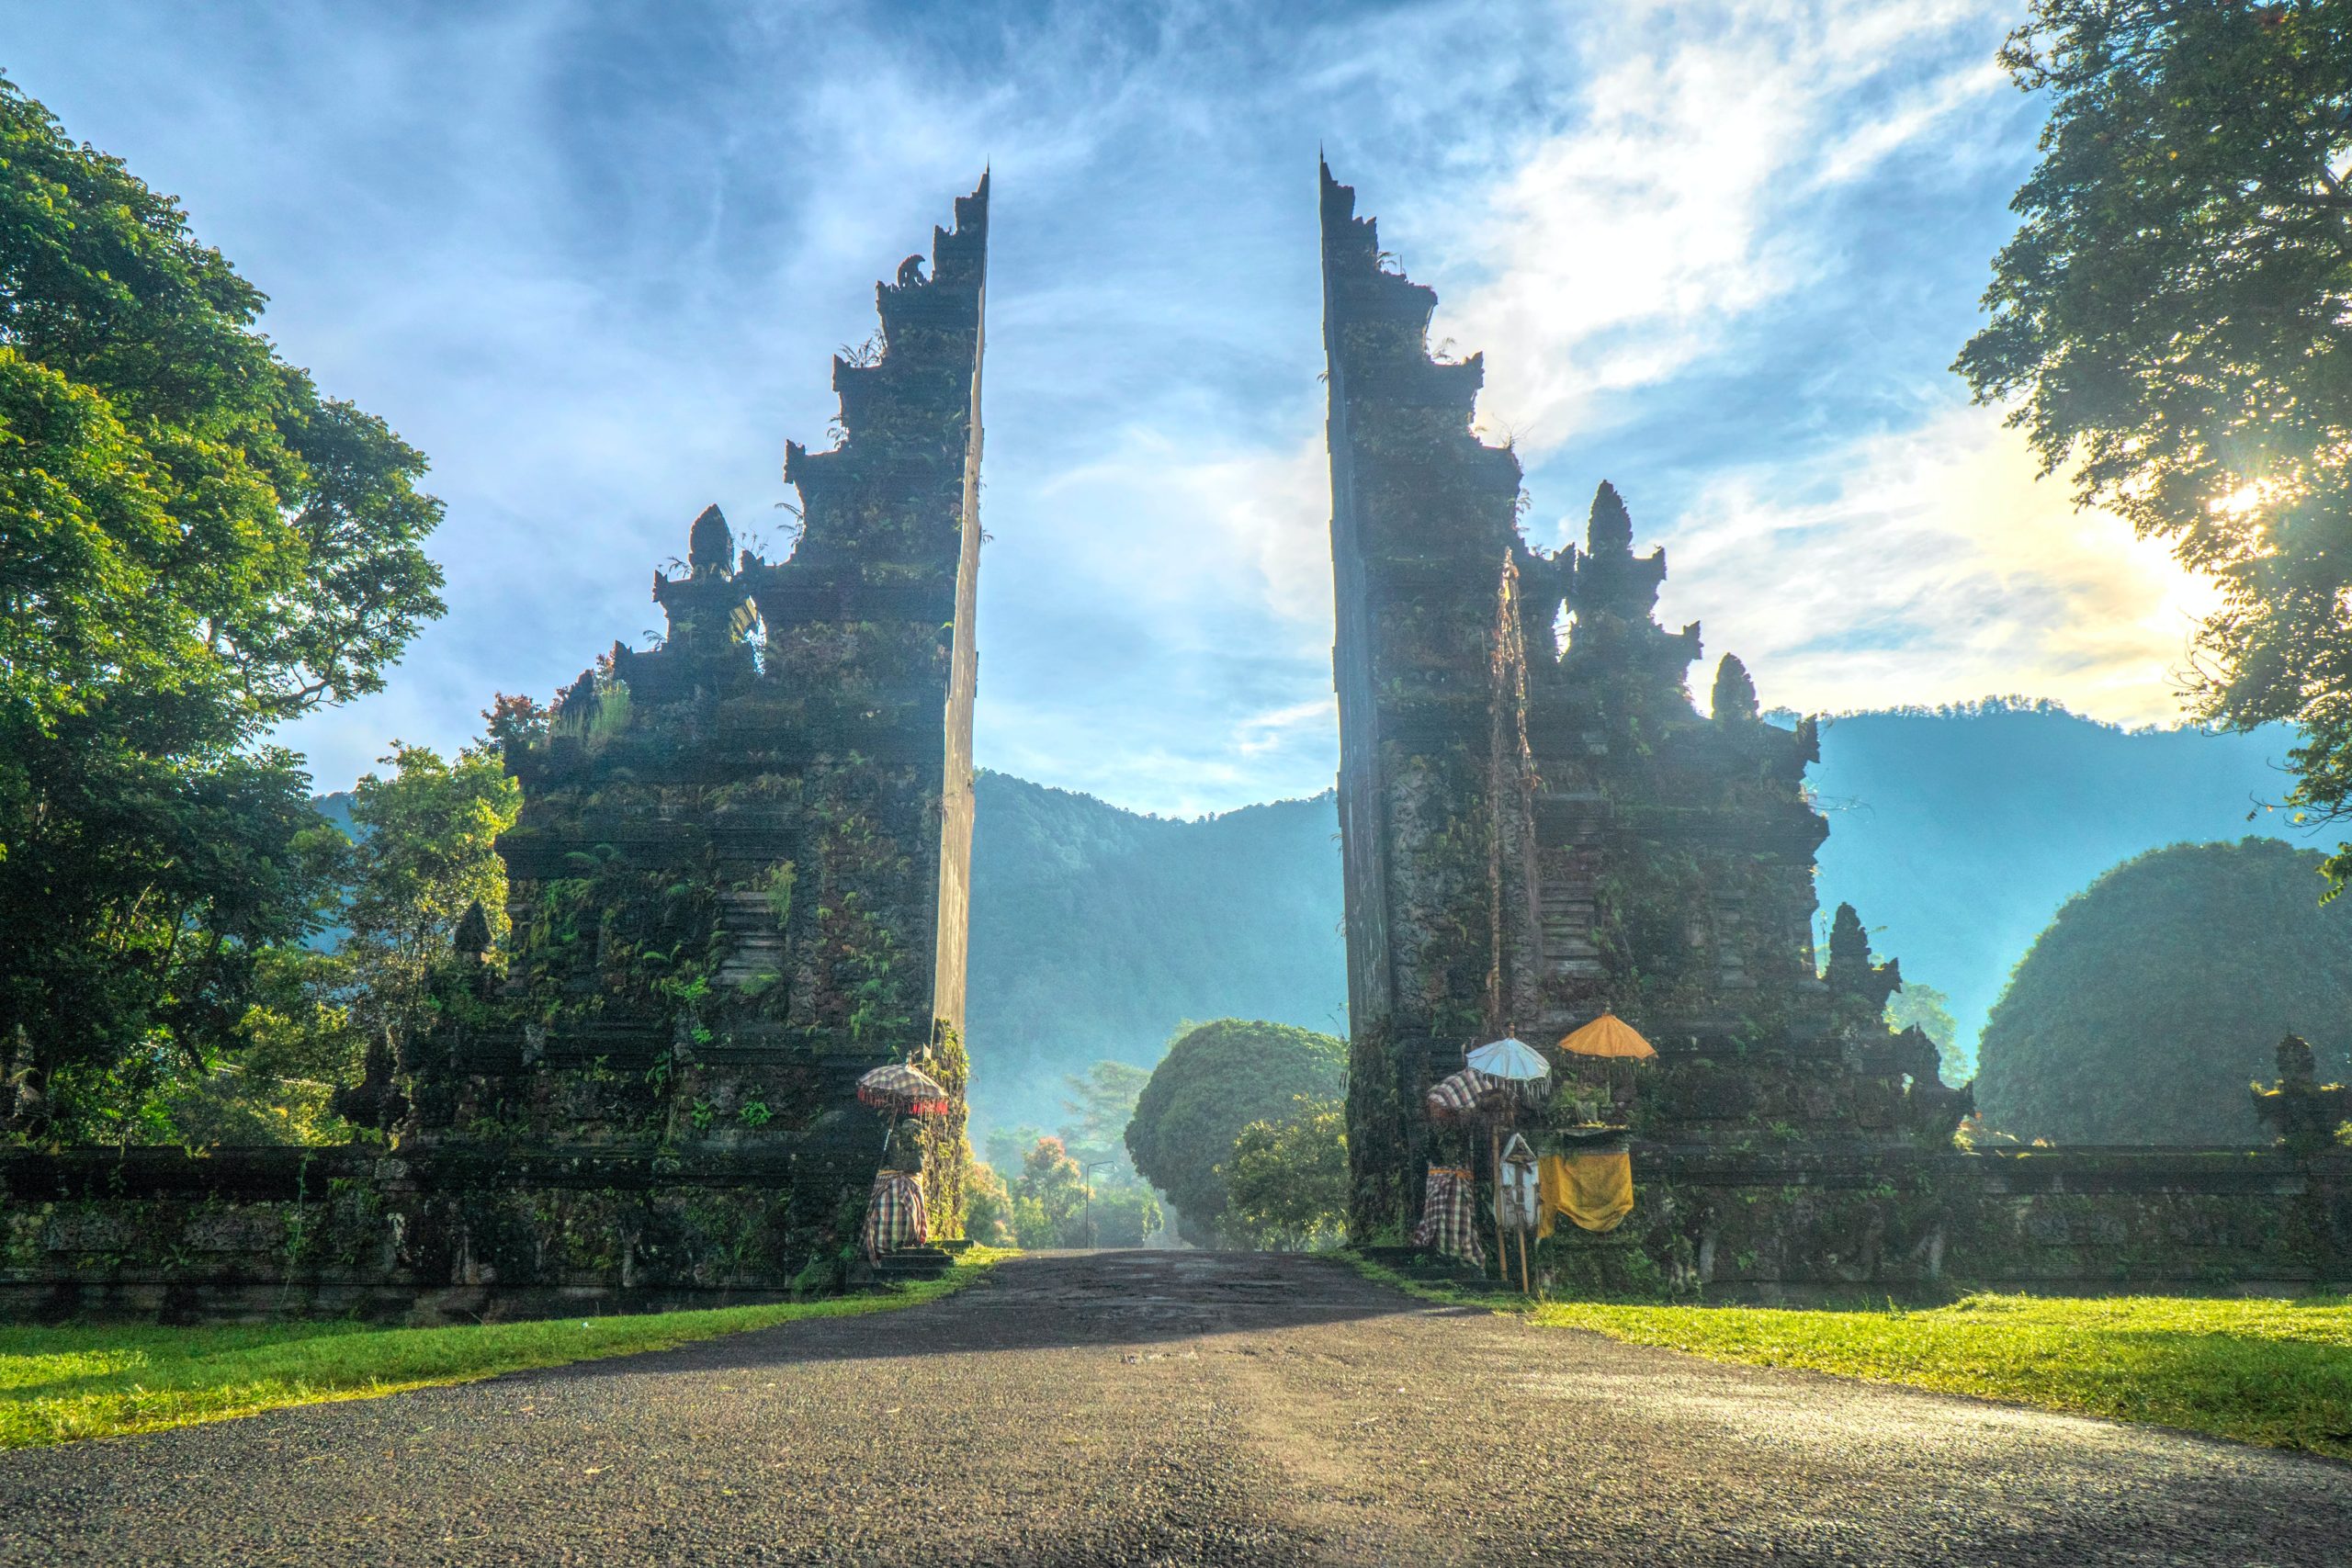 Slow Travel in Bali in a Less Touristy Way